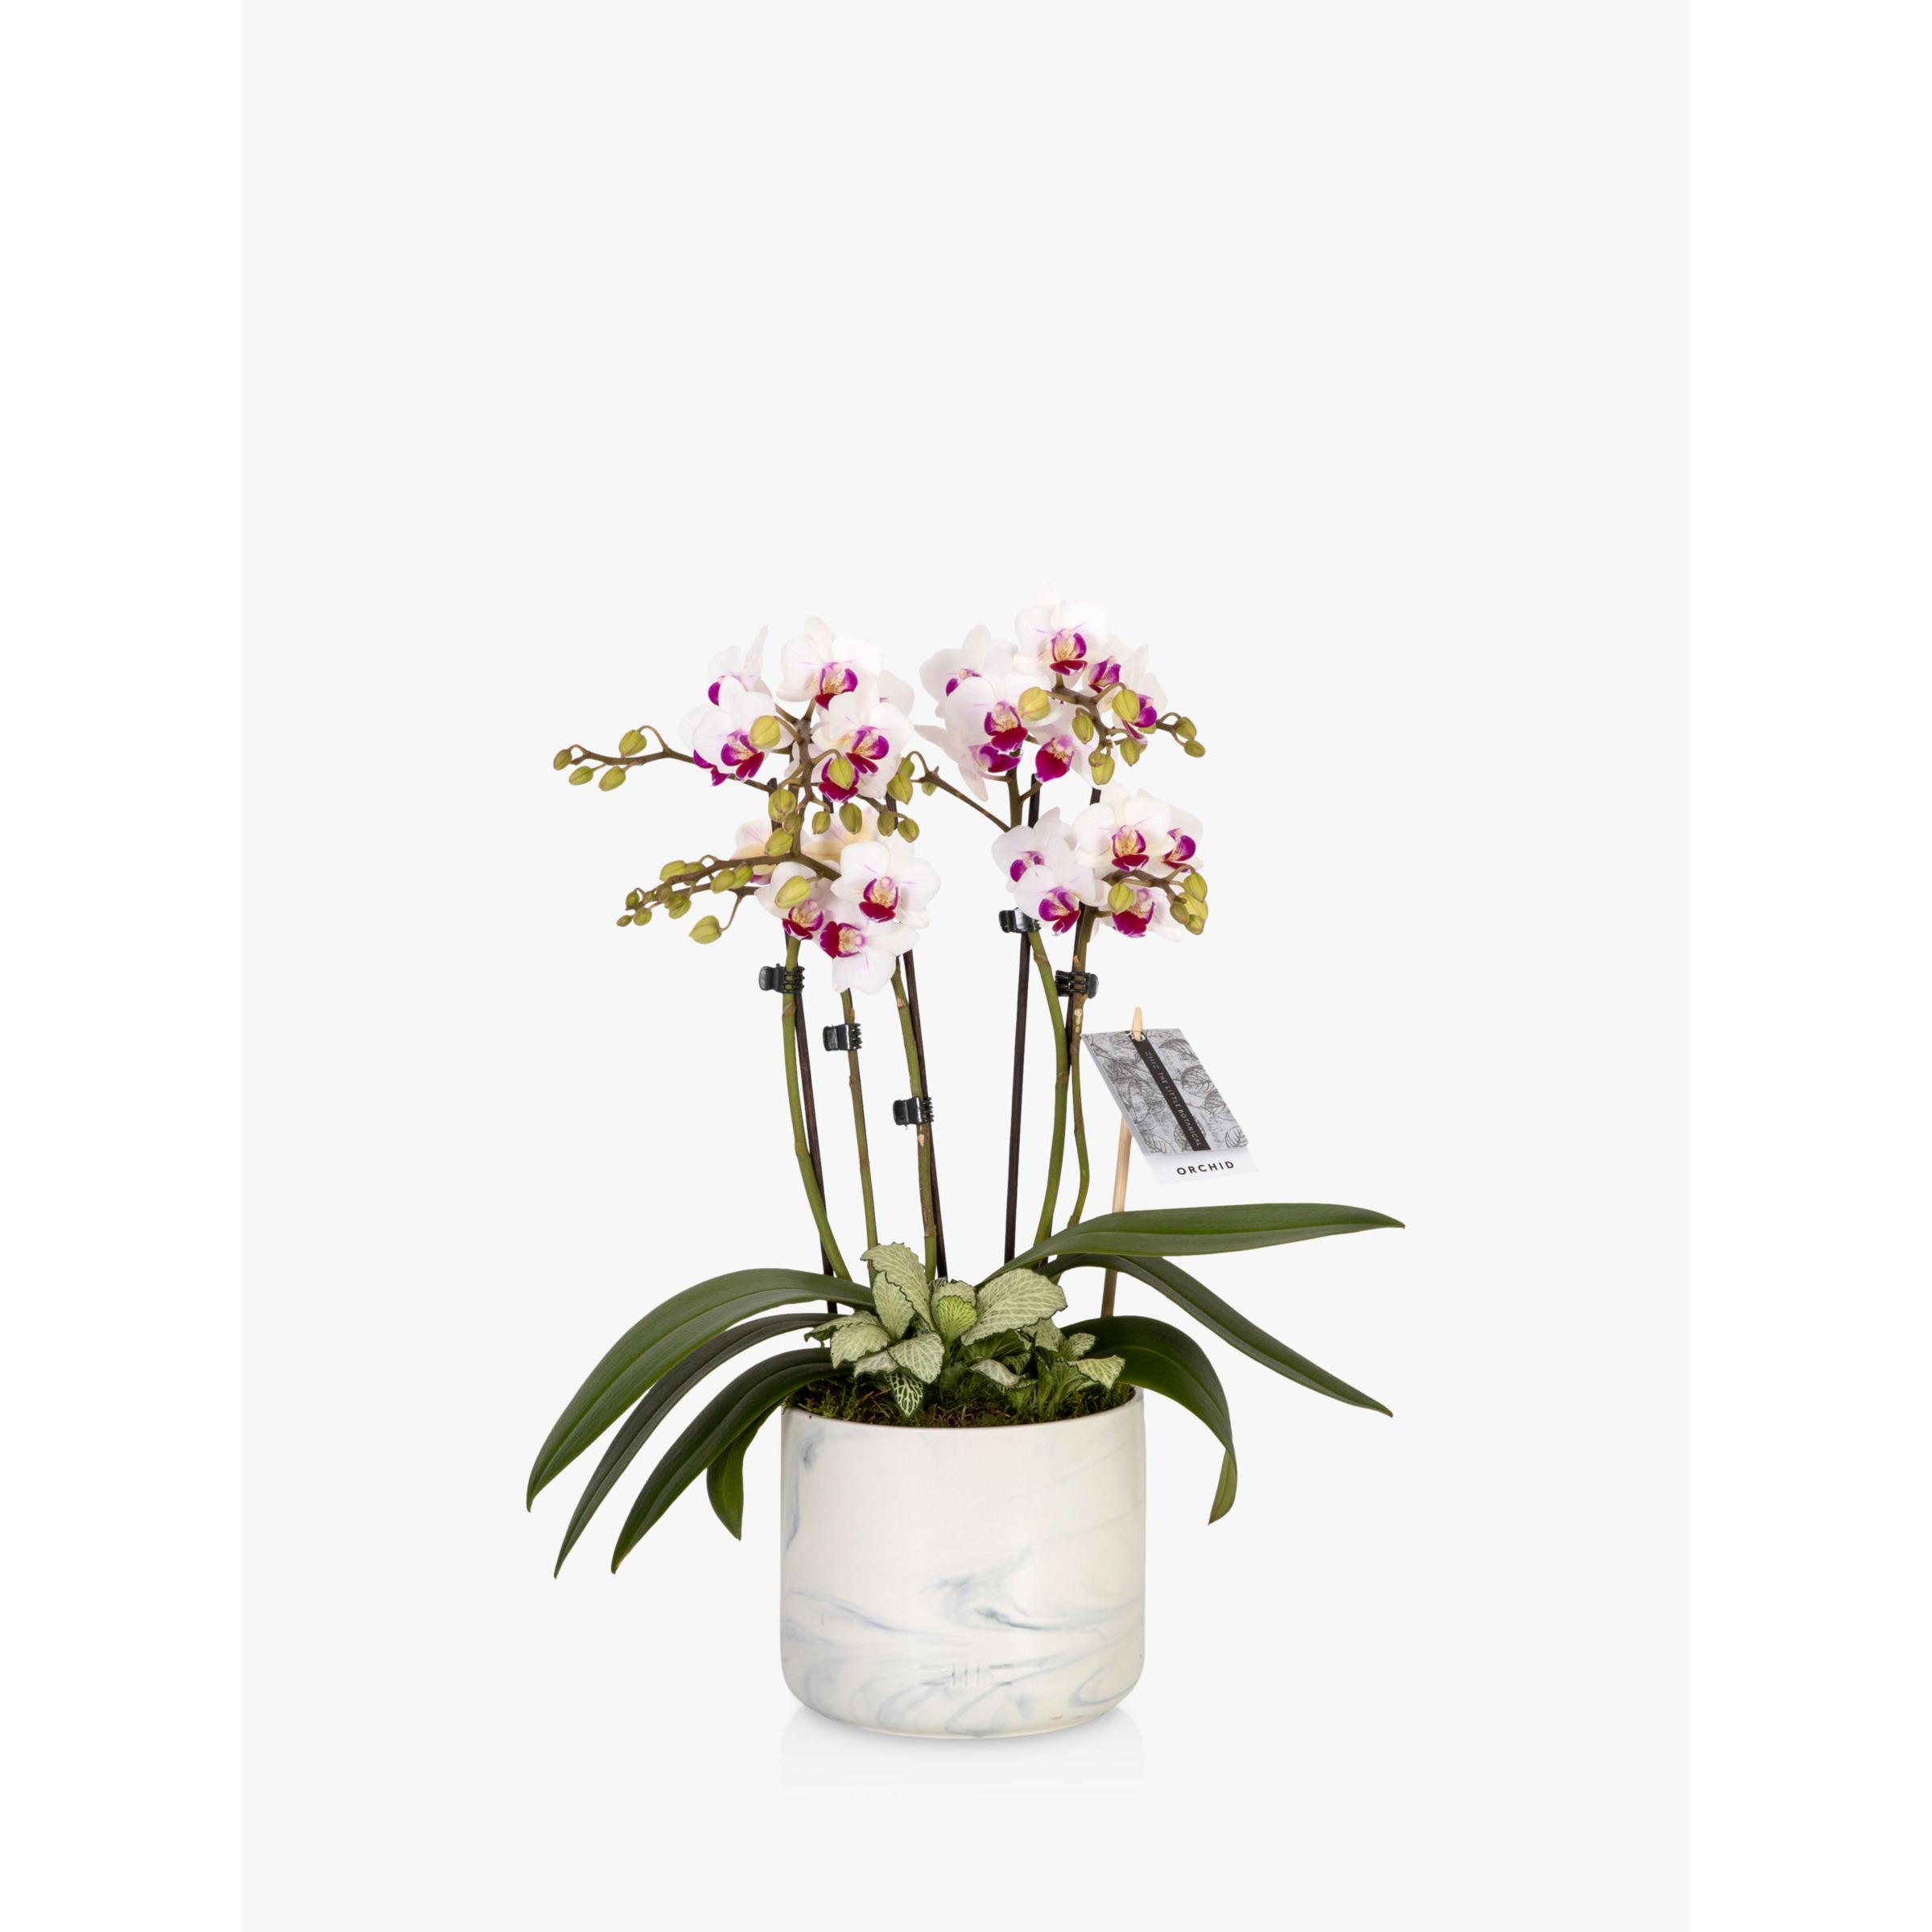 The Little Botanical Marble Orchid & Greenery Planter - image 1